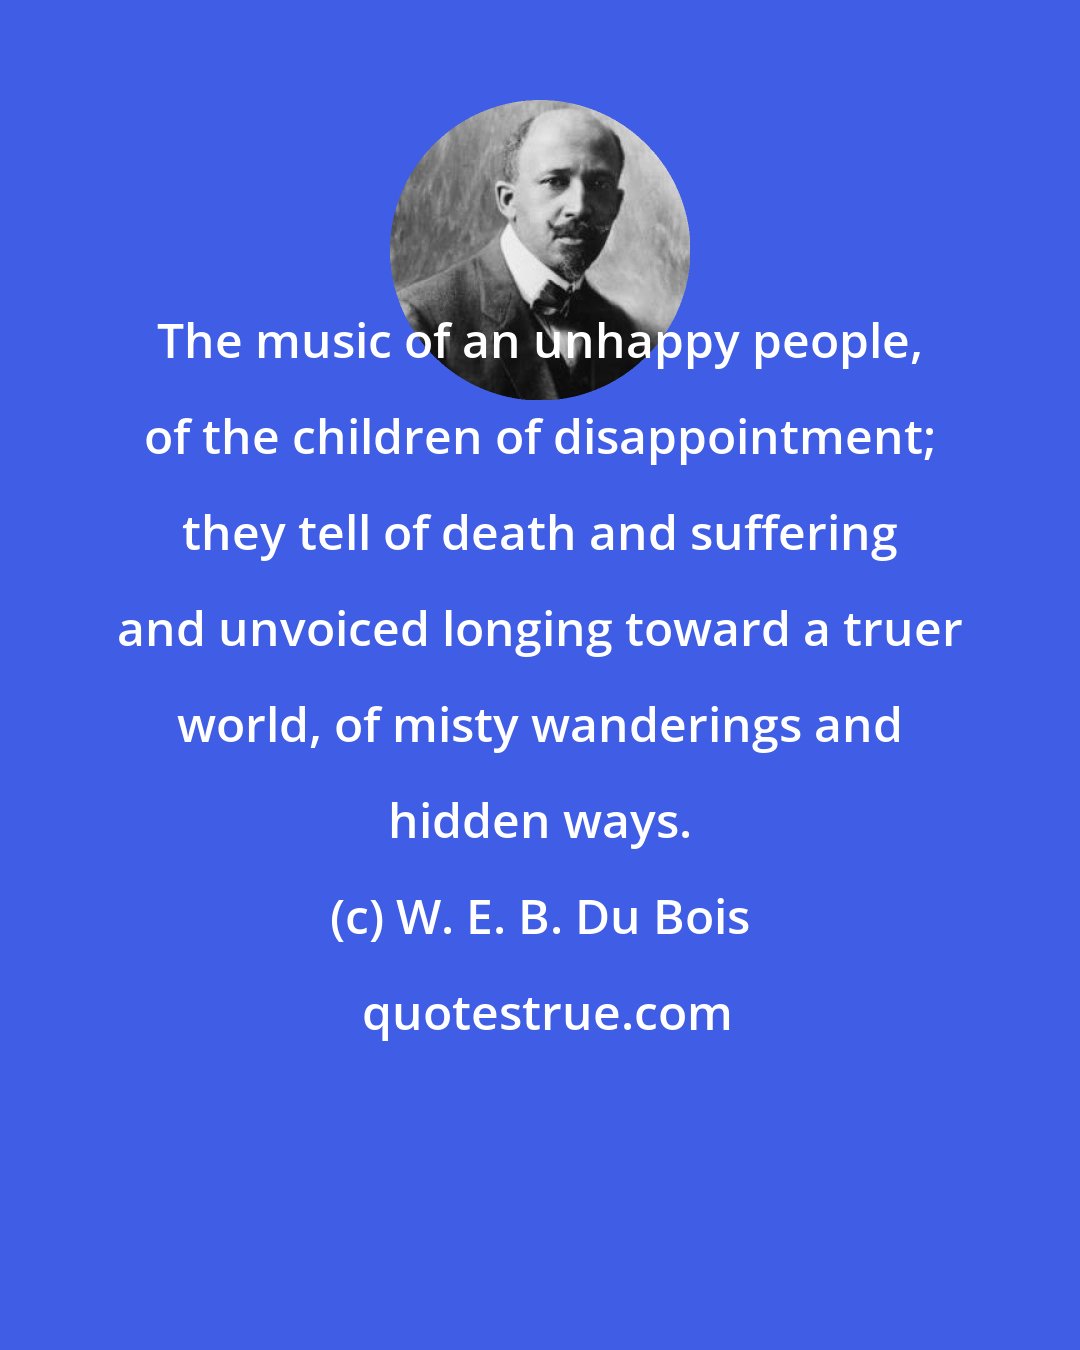 W. E. B. Du Bois: The music of an unhappy people, of the children of disappointment; they tell of death and suffering and unvoiced longing toward a truer world, of misty wanderings and hidden ways.